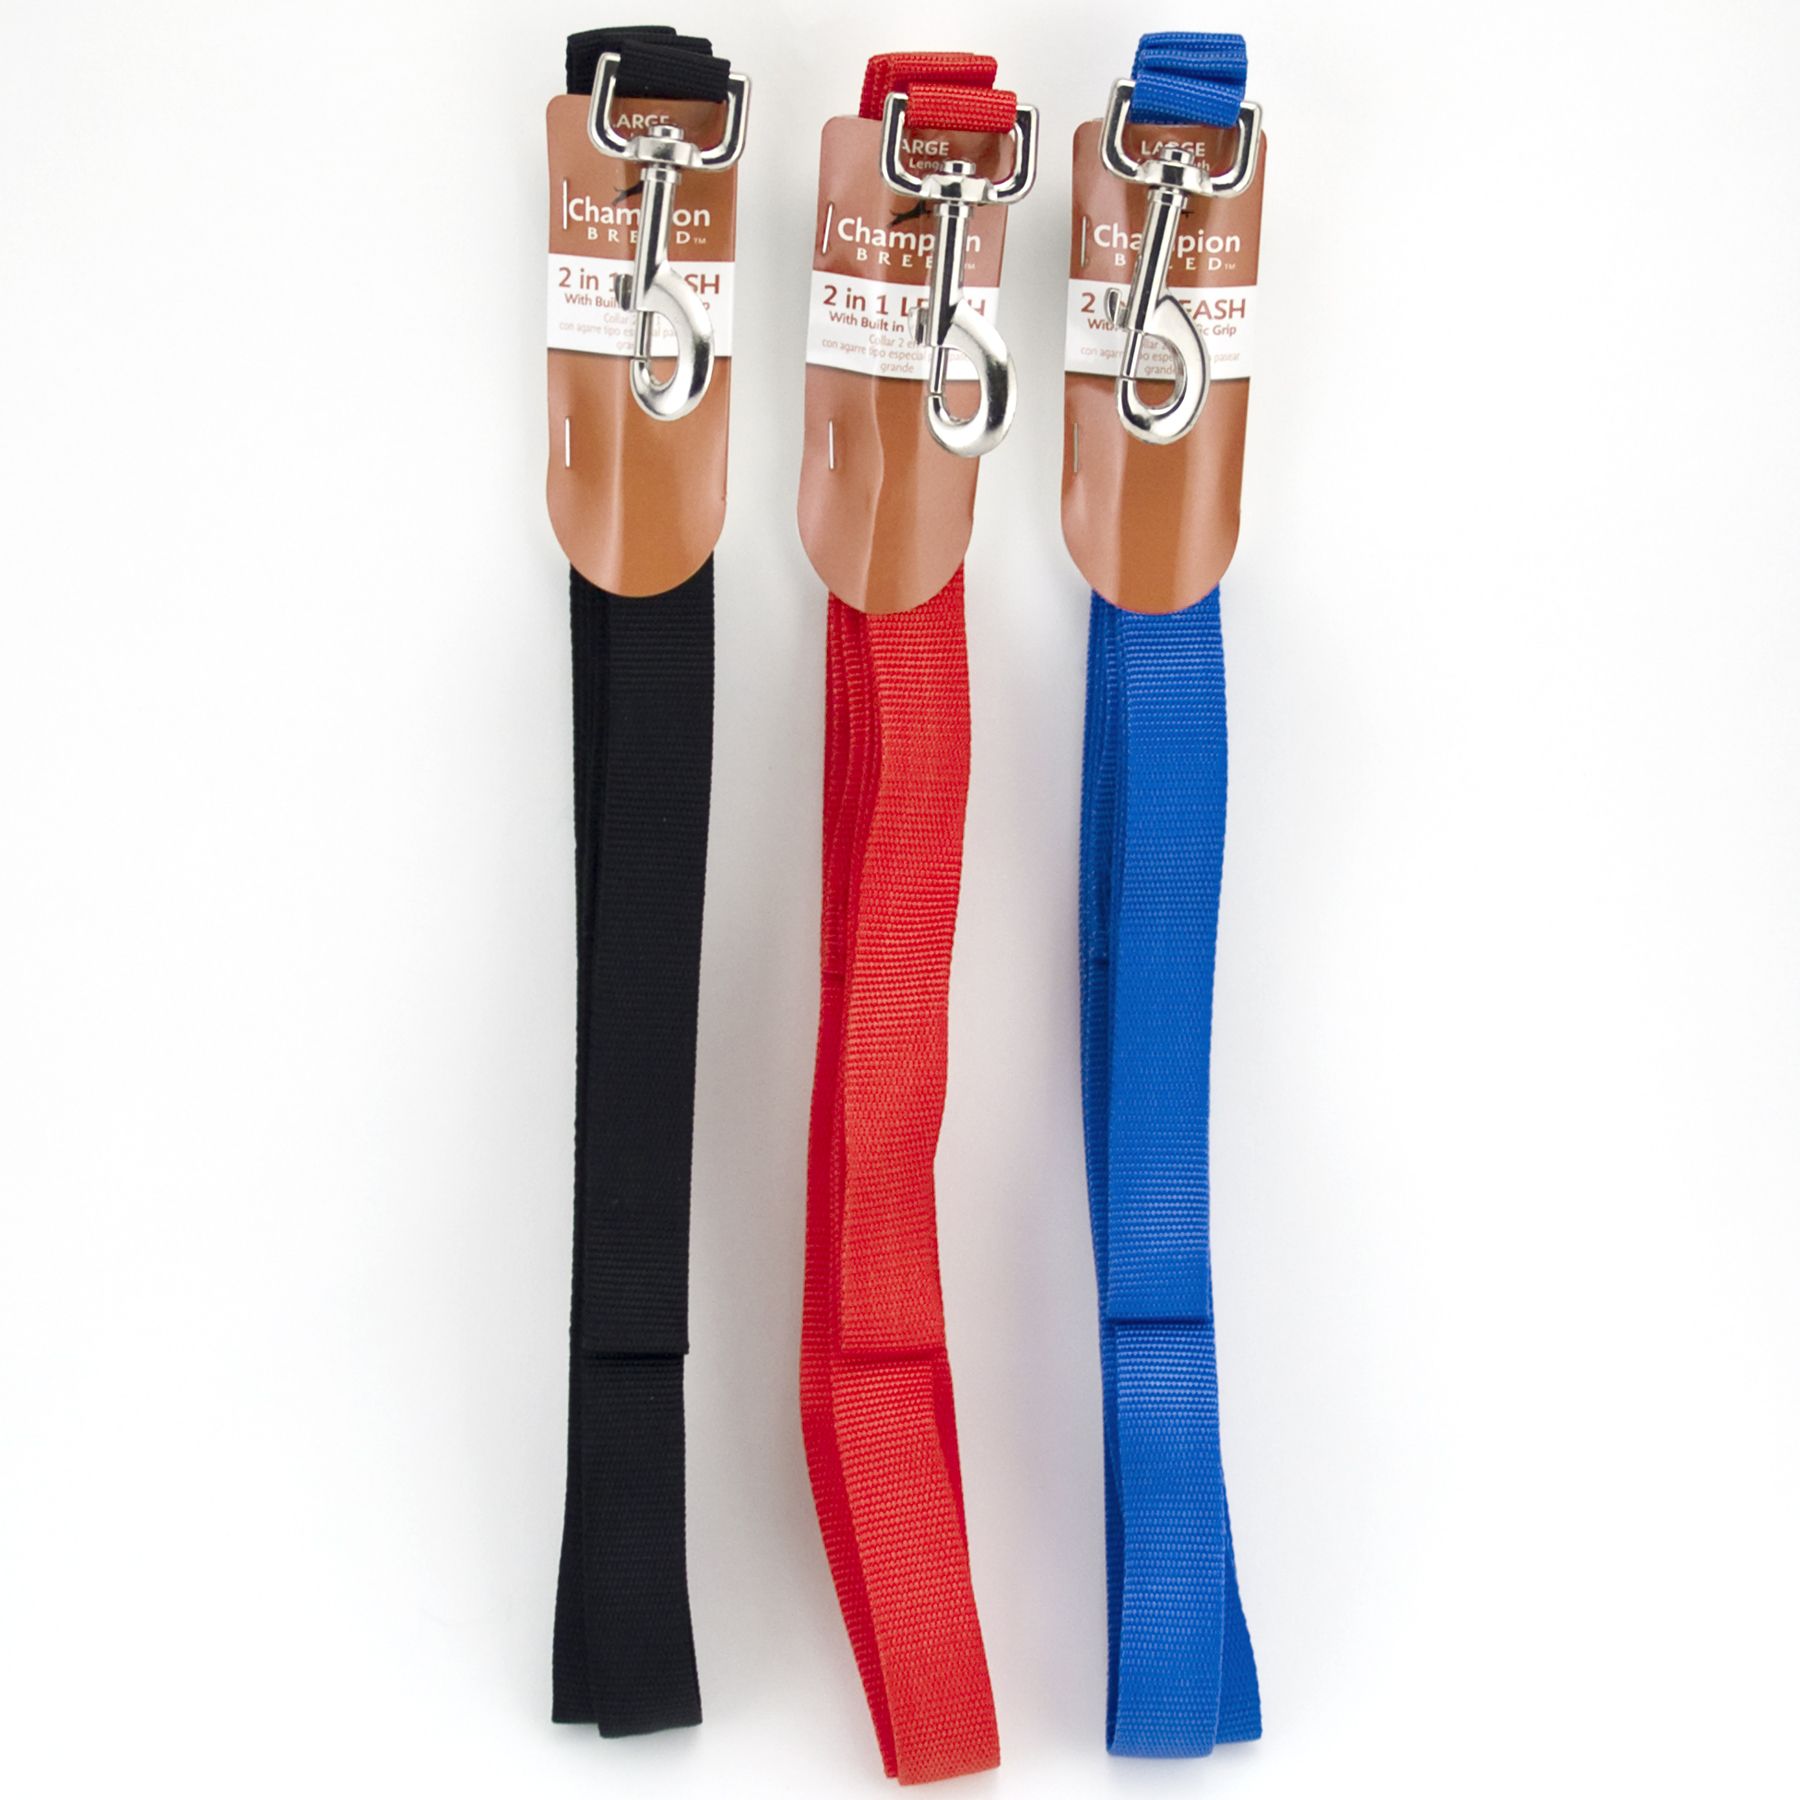 Champion Breed 2 IN 1 TRAFFIC GRIP LEASH, WITH SECOND HAND GRIP FOR EXTRA CONTROL, RED, BLUE OR BLACK, 1 X 72